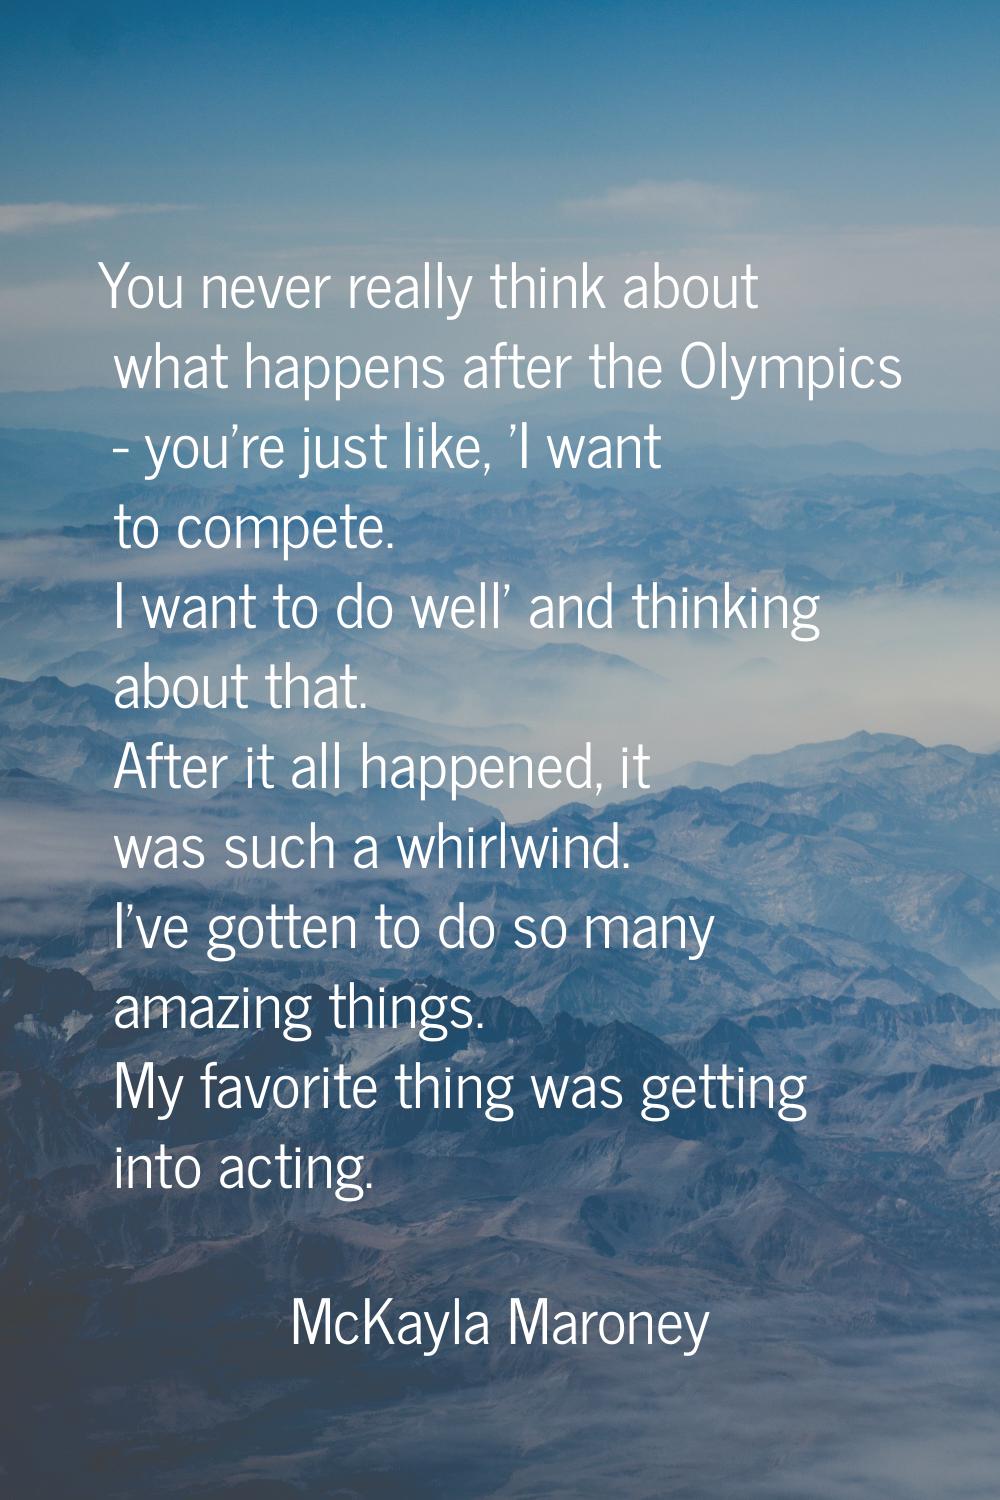 You never really think about what happens after the Olympics - you're just like, 'I want to compete